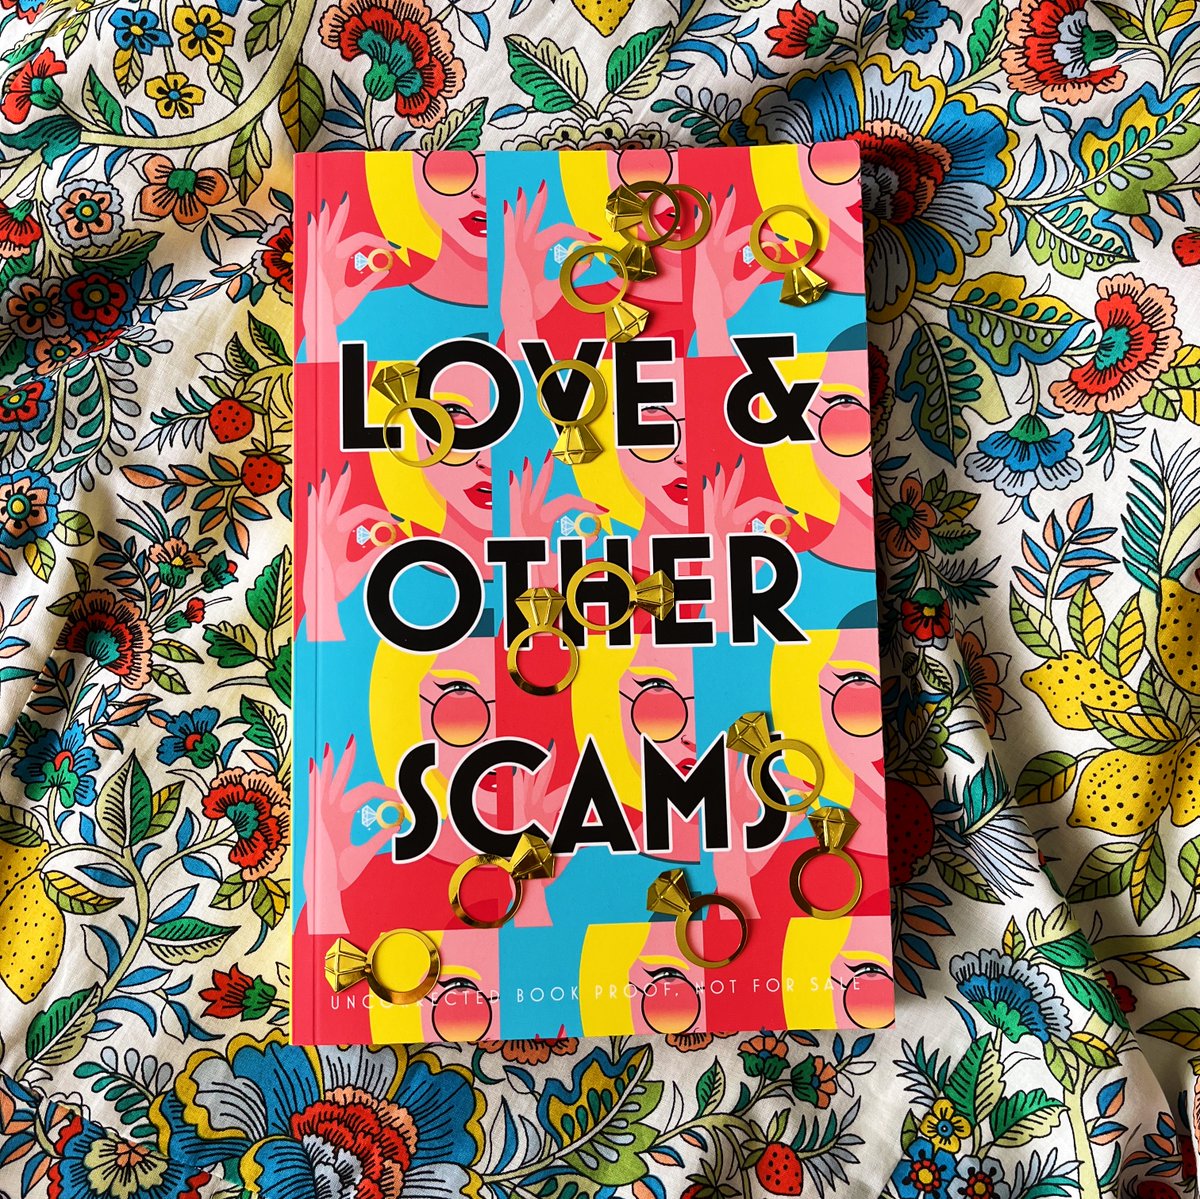 Love & Other Scams is the debut heist romcom by @Philip_Ellis. Cat is skint but luckily the mean girl from her past is marrying a gazillionaire; it's not wrong to rob the rich, right? With Jake the bartender/con-artist, Cat plots to steal the diamond engagement ring. Out 03/23